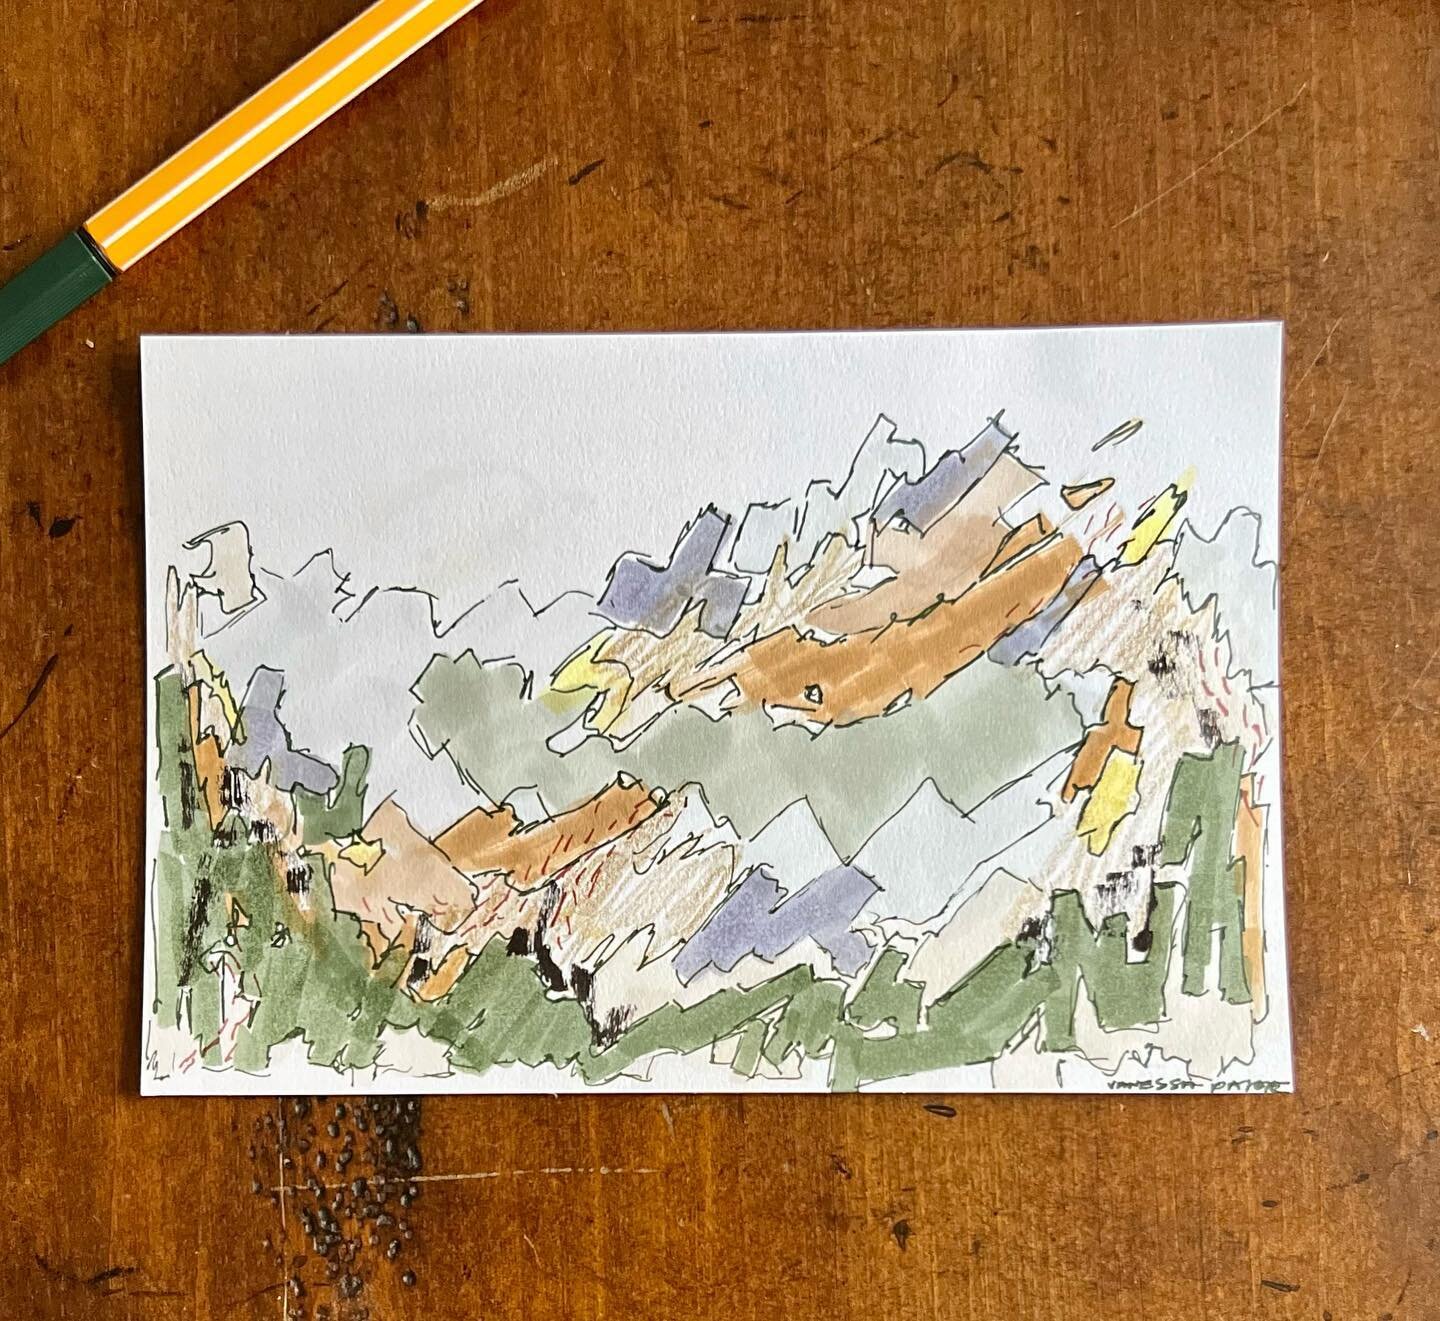 feeling drawn to play lately. no expectations or goals, just trying new mediums, styles, and techniques with whatever I have on hand in the moment. 

so here&rsquo;s a little pen &amp; marker landscape moment on an index card.